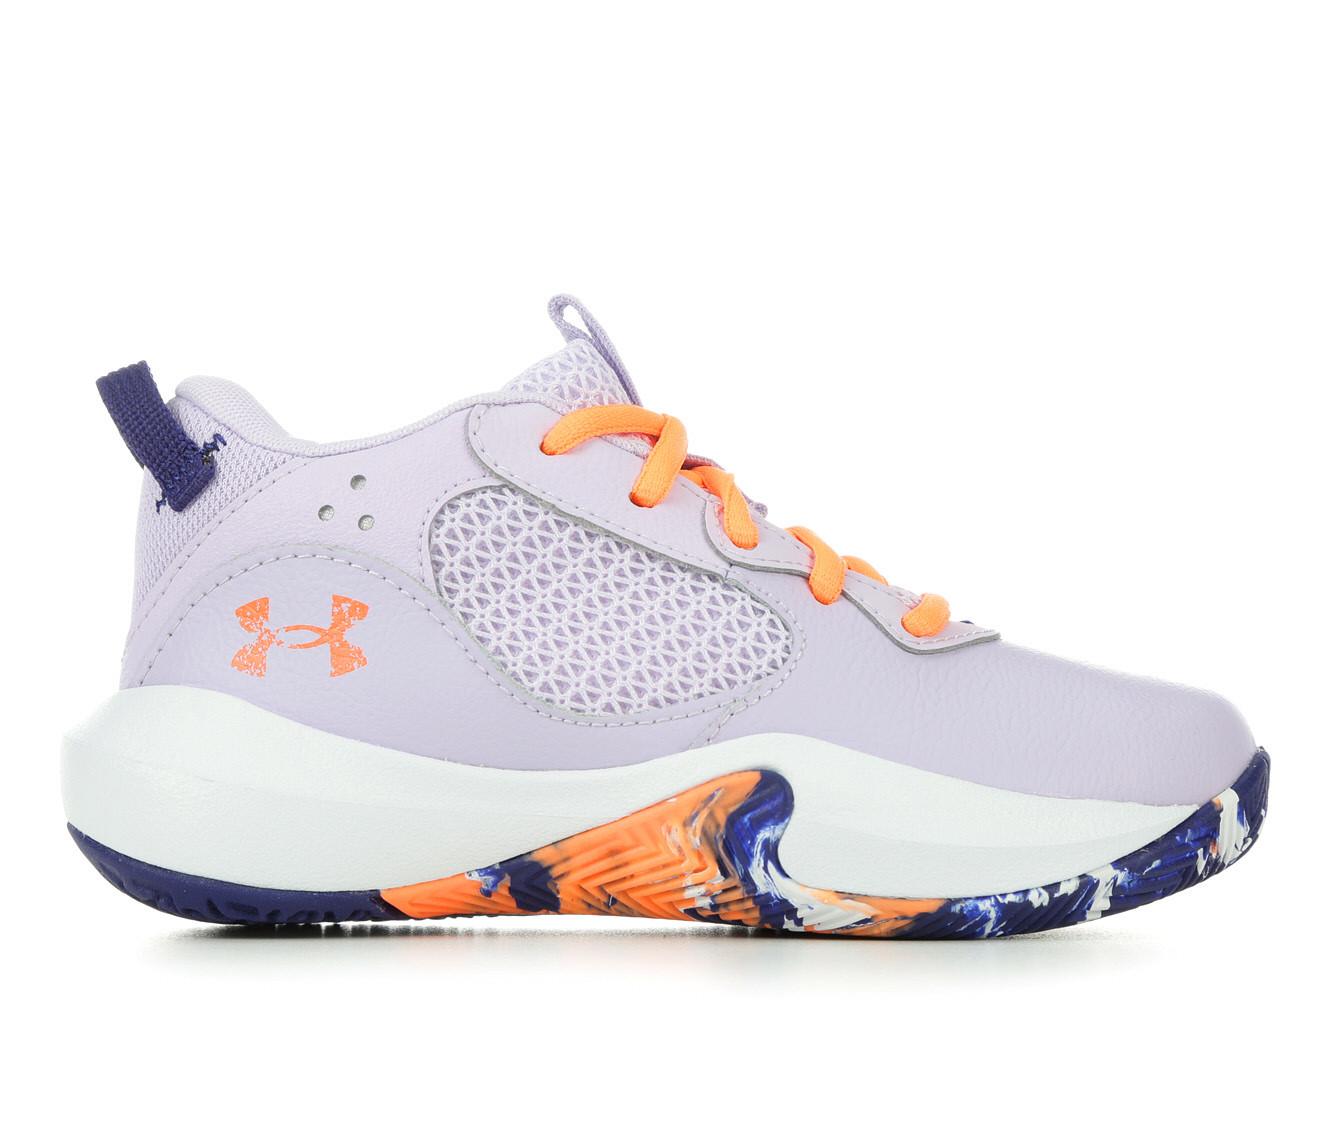 Basketball shoes Under Armour UA Lockdown 6 